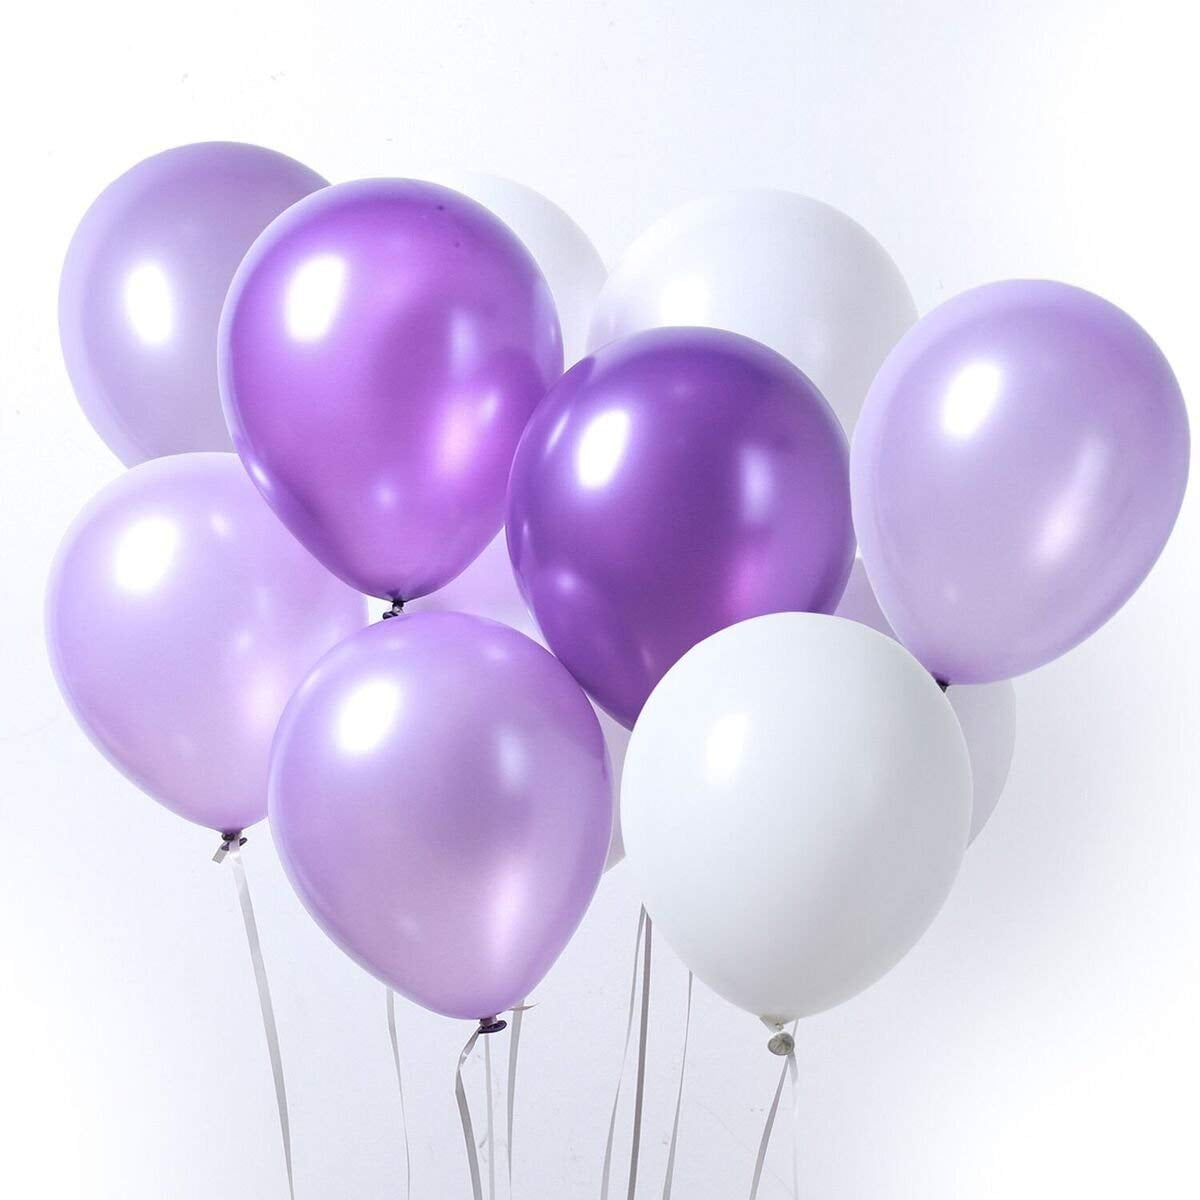 30 x 25th SILVER ANNIVERSARY 12" HELIUM QUALITY PEARLISED BALLOONS PA